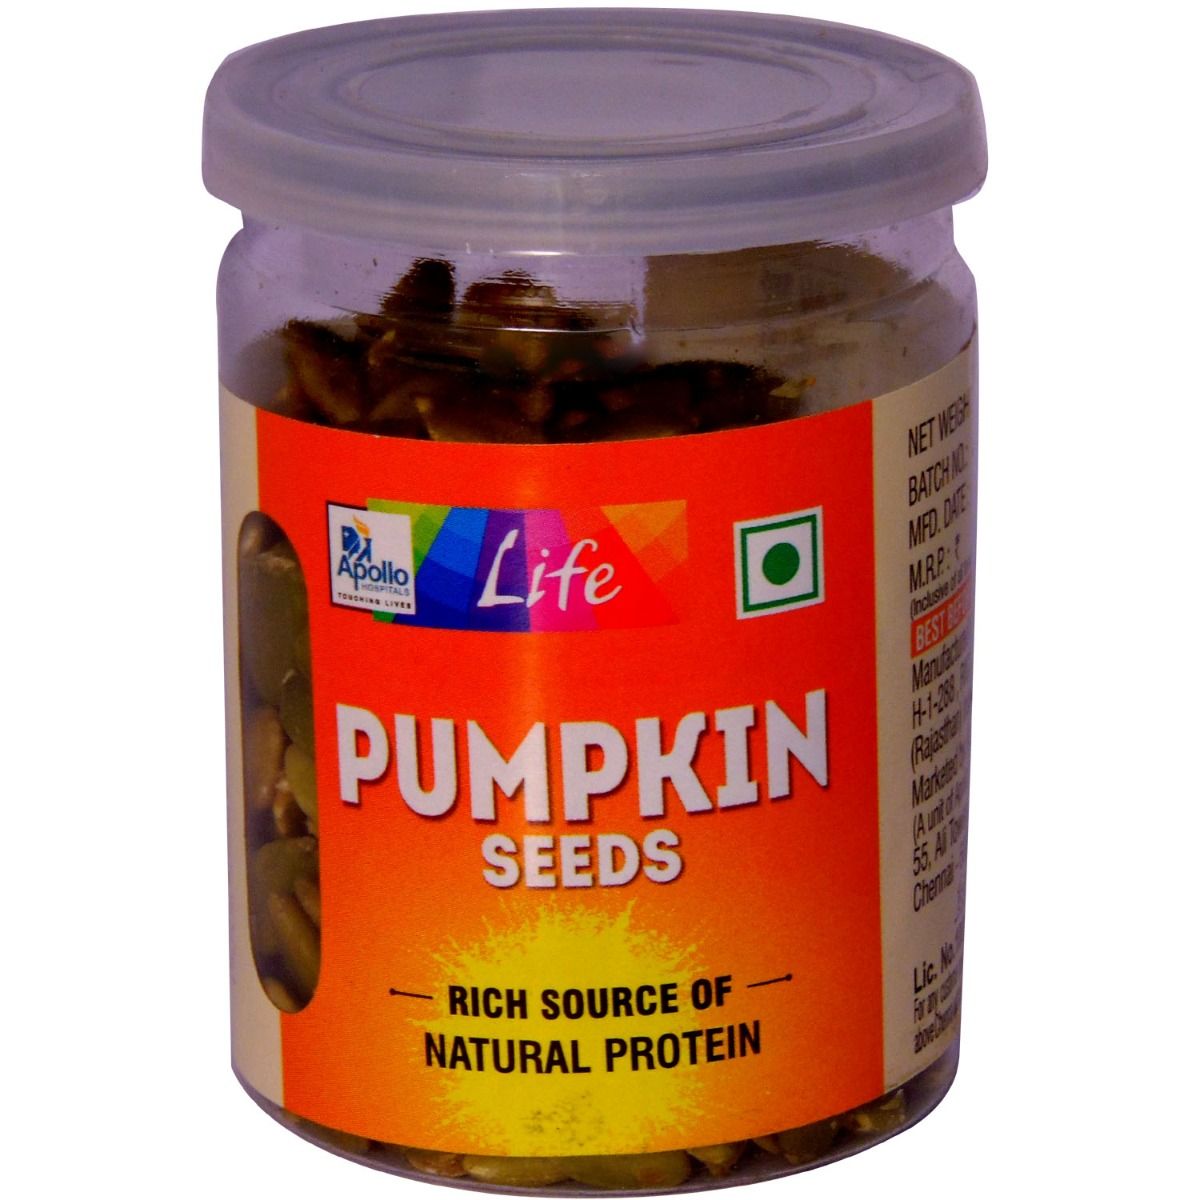 Apollo Life Pumpkin Seeds, 60 gm, Pack of 1 